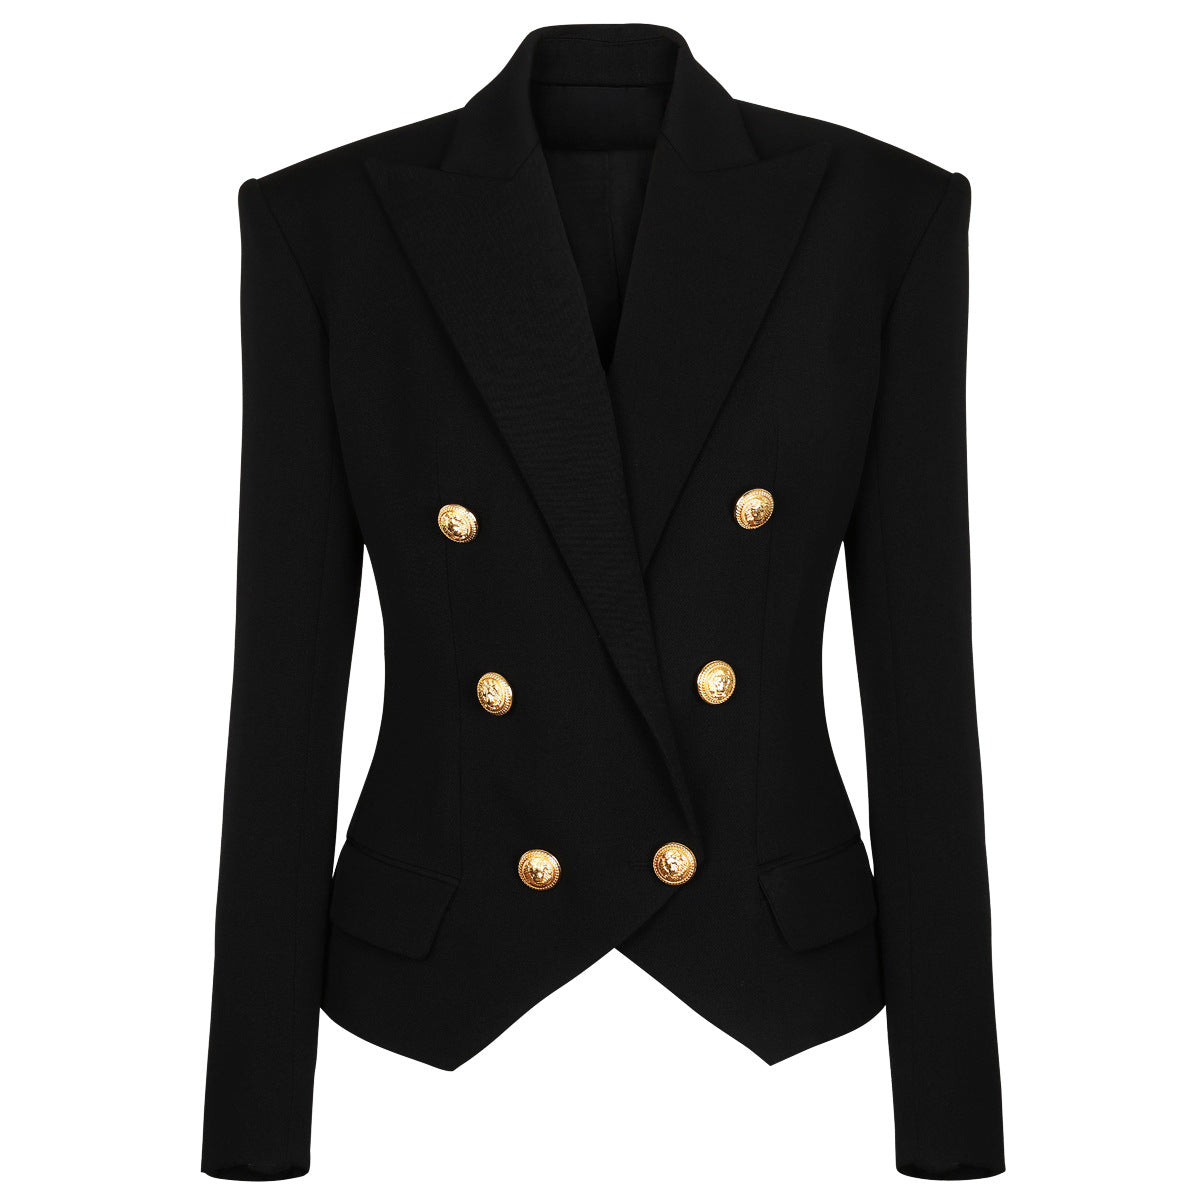 Classic Double Breasted Blazer With Ornate Gold Buttons